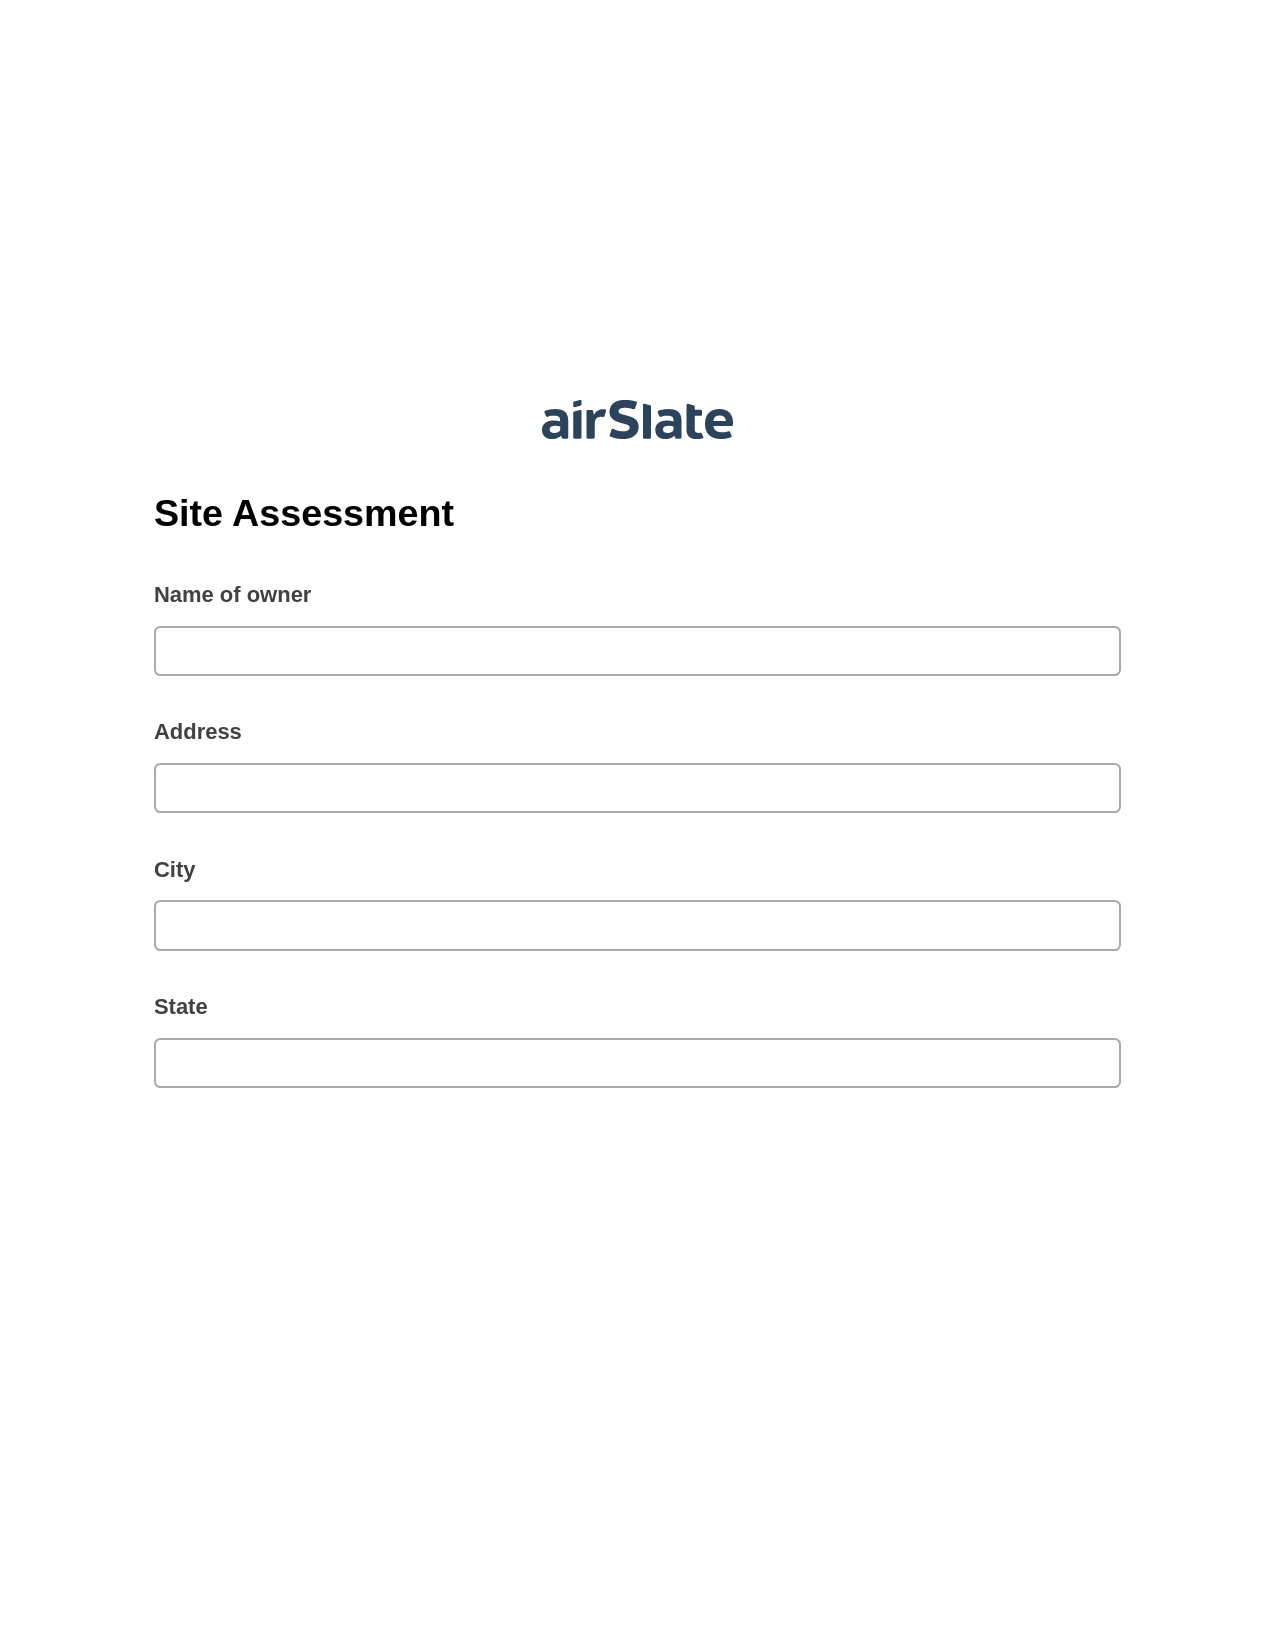 Multirole Site Assessment Pre-fill Document Bot, System Bot - Create a Slate in another Flow, Google Drive Bot